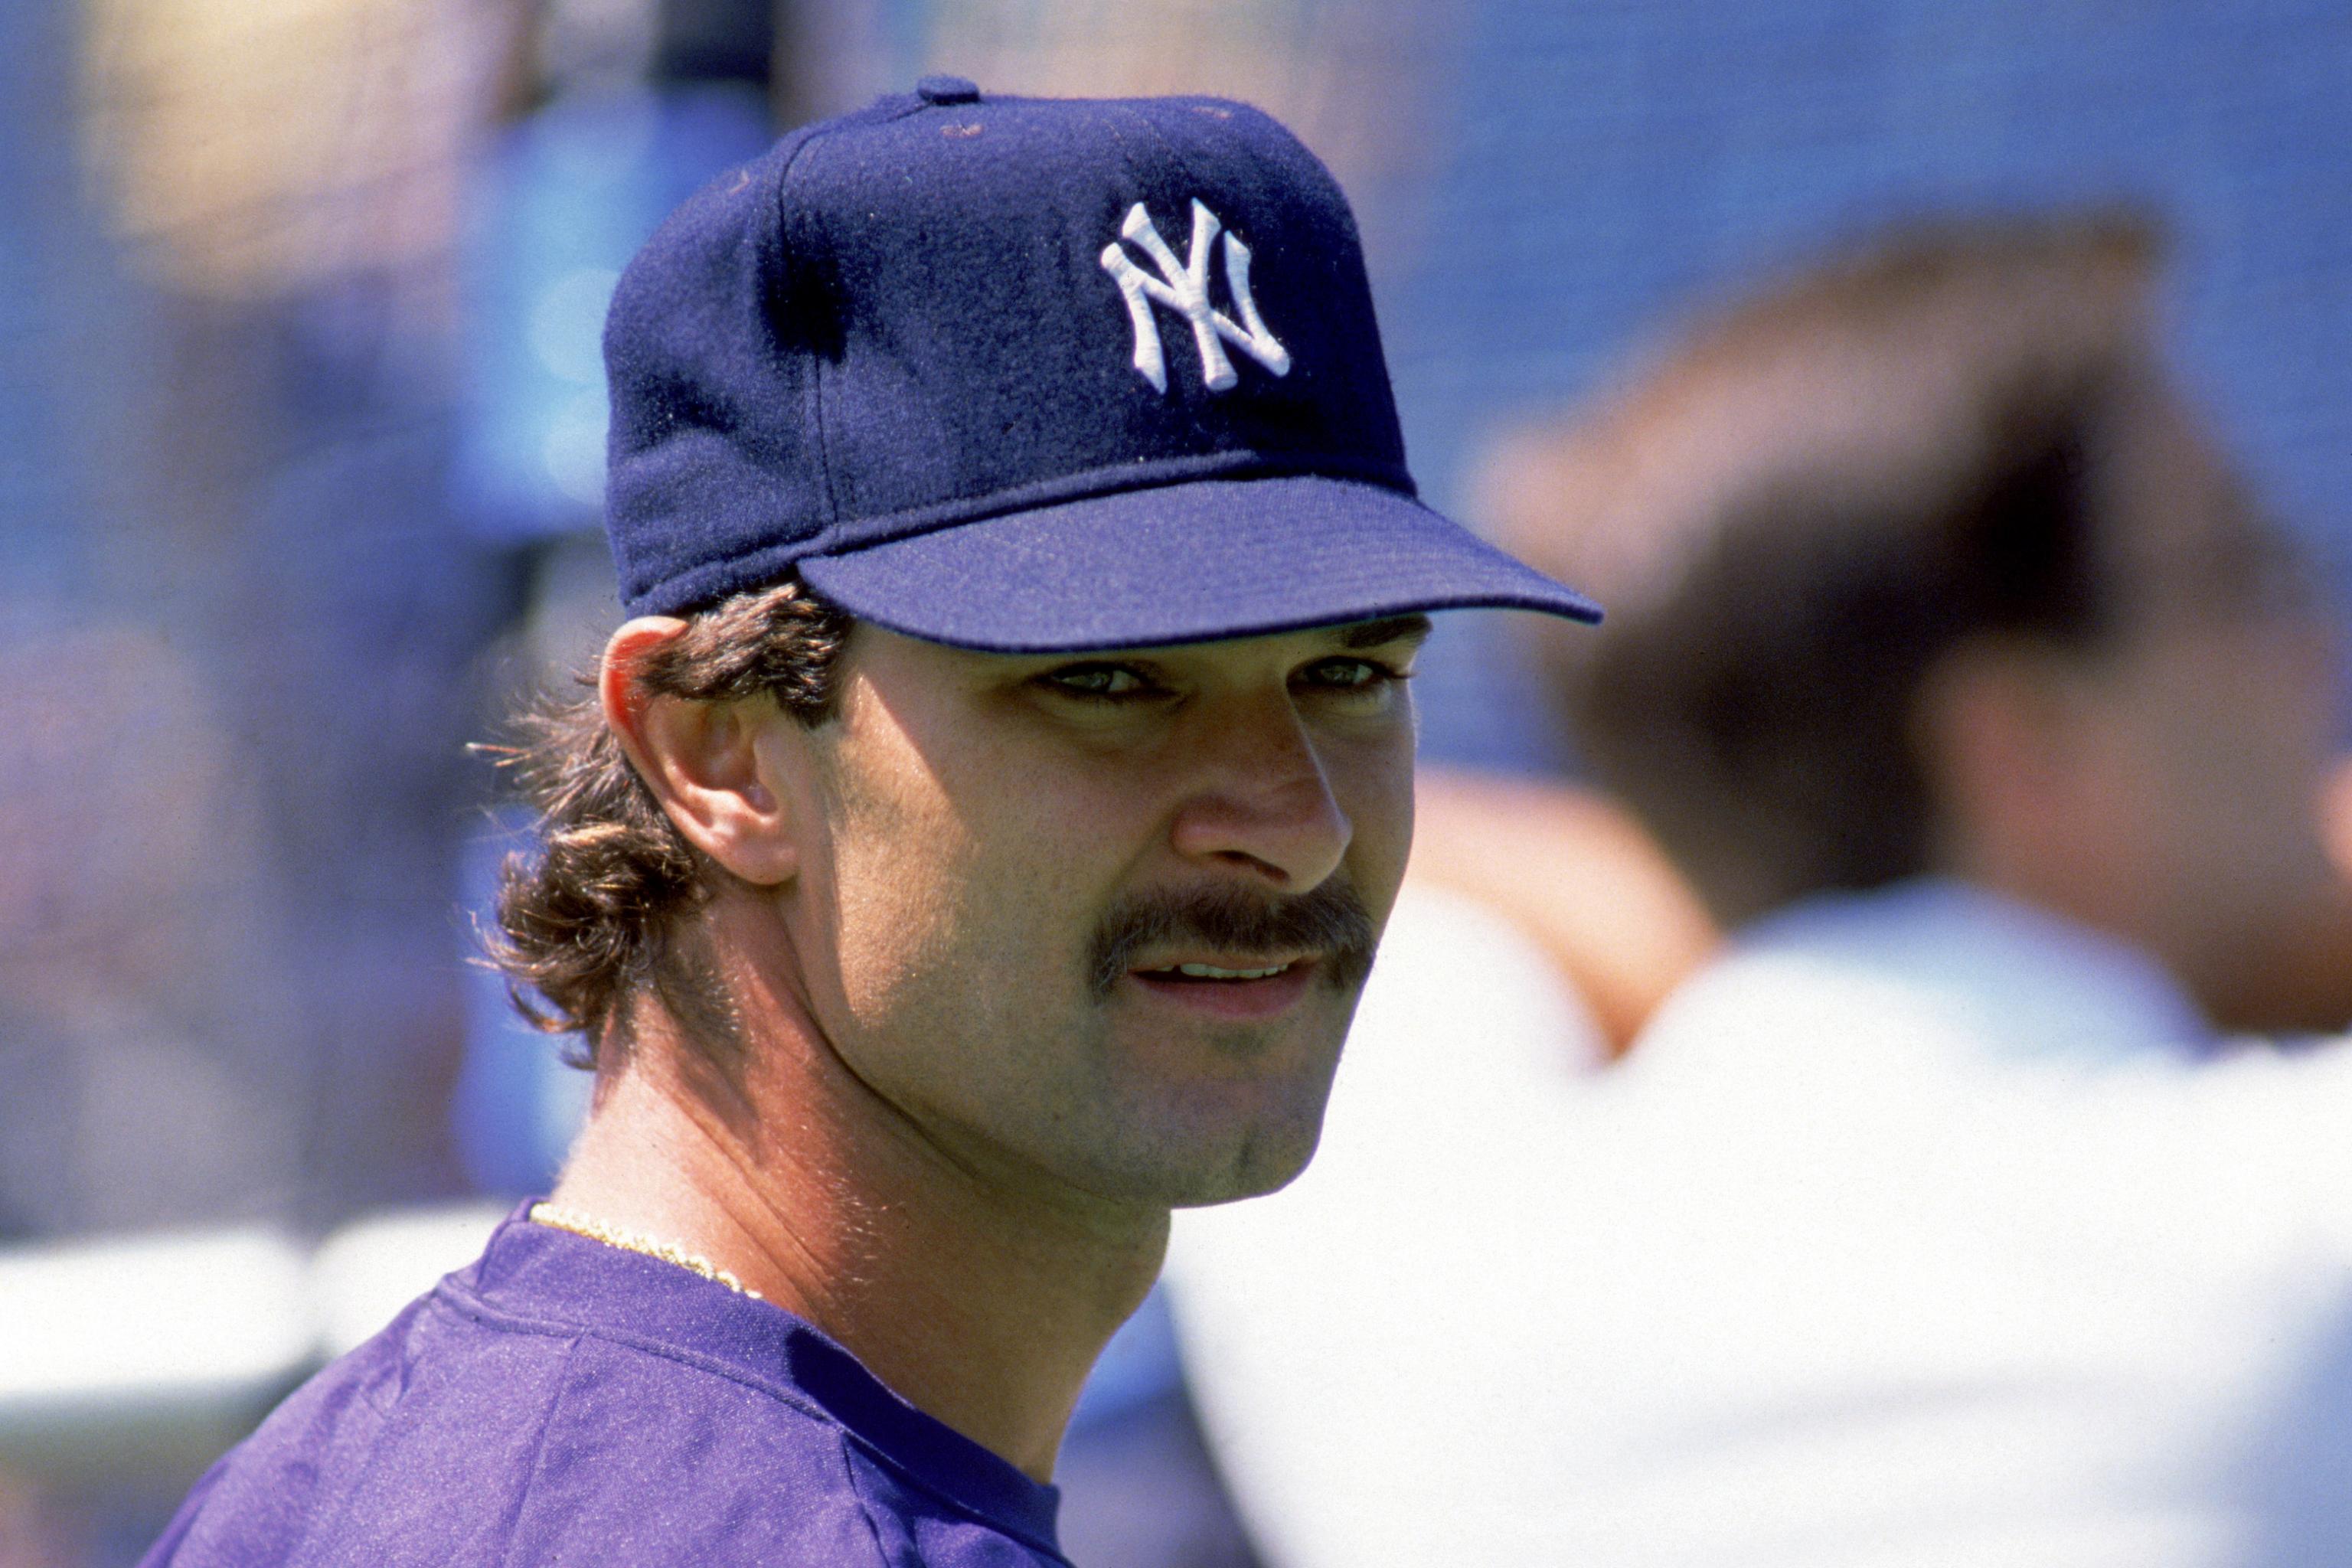 Is There A Way to Bring Don Mattingly Back to the Yankees? 